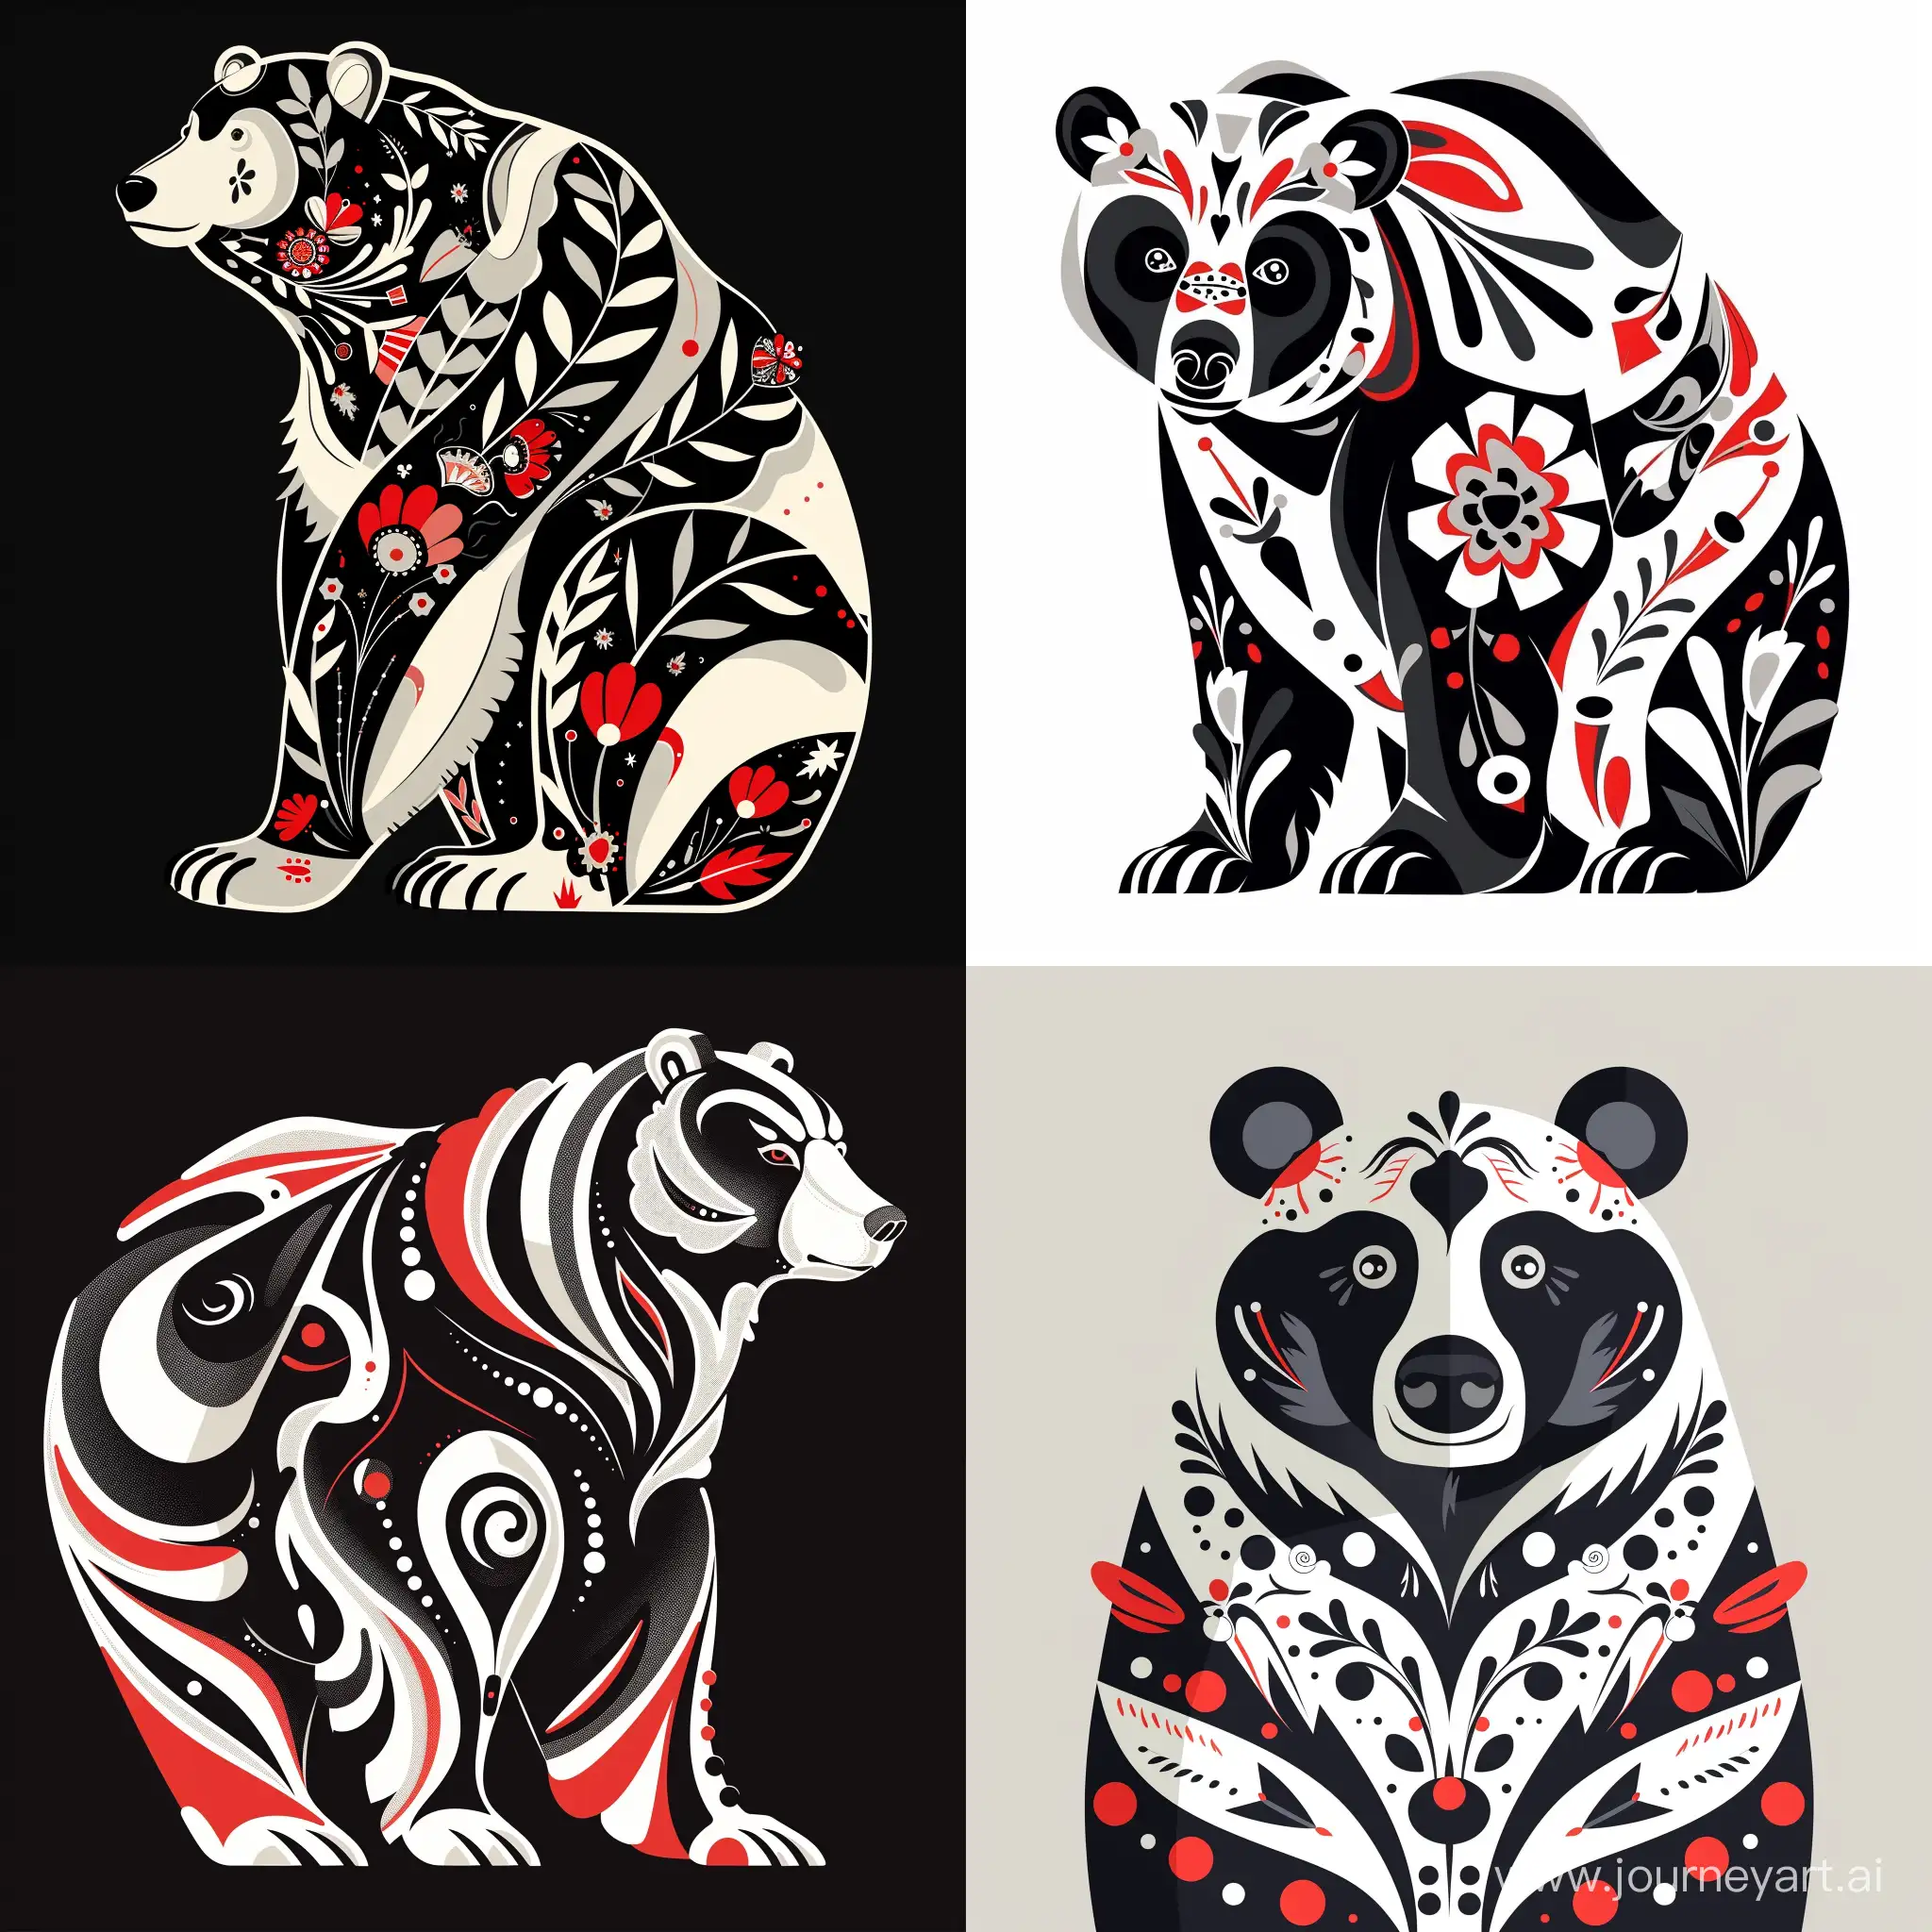 Russian-Folk-Style-Bear-TShirt-Minimalistic-Vector-Illustration-in-Black-White-and-Red